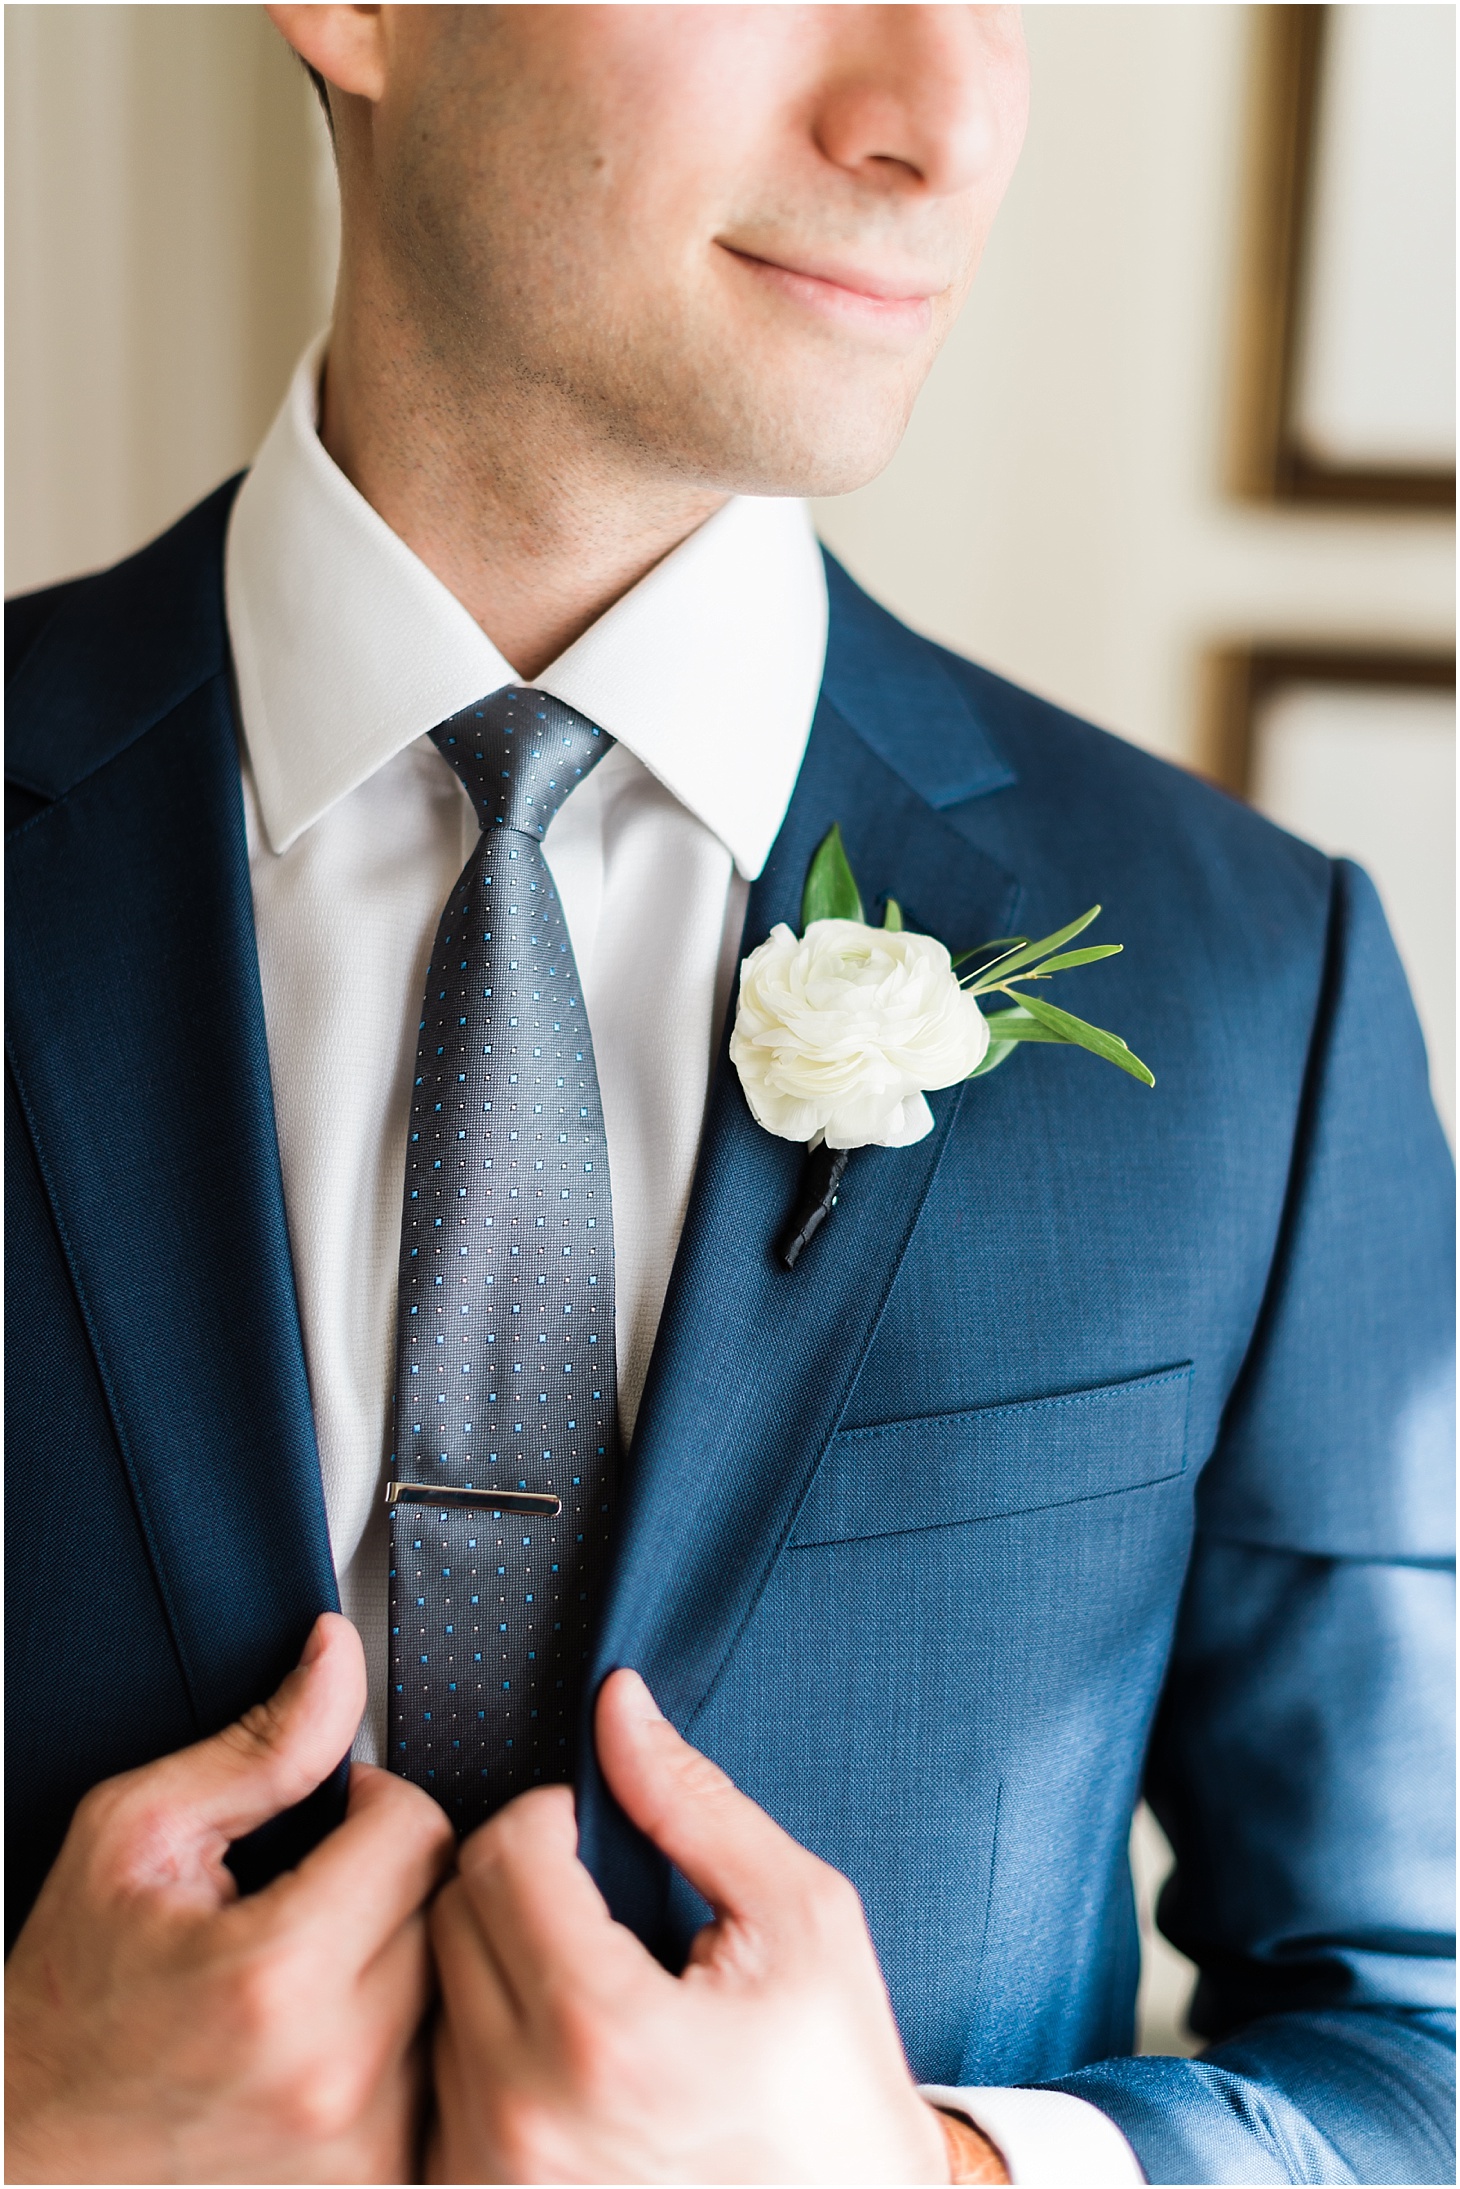 Groom Getting Ready at The Hay-Adams Hotel, Bonobos Suit, Industrial-Chic Wedding at Long View Gallery in DC, Sarah Bradshaw Photography, DC Wedding Photographer